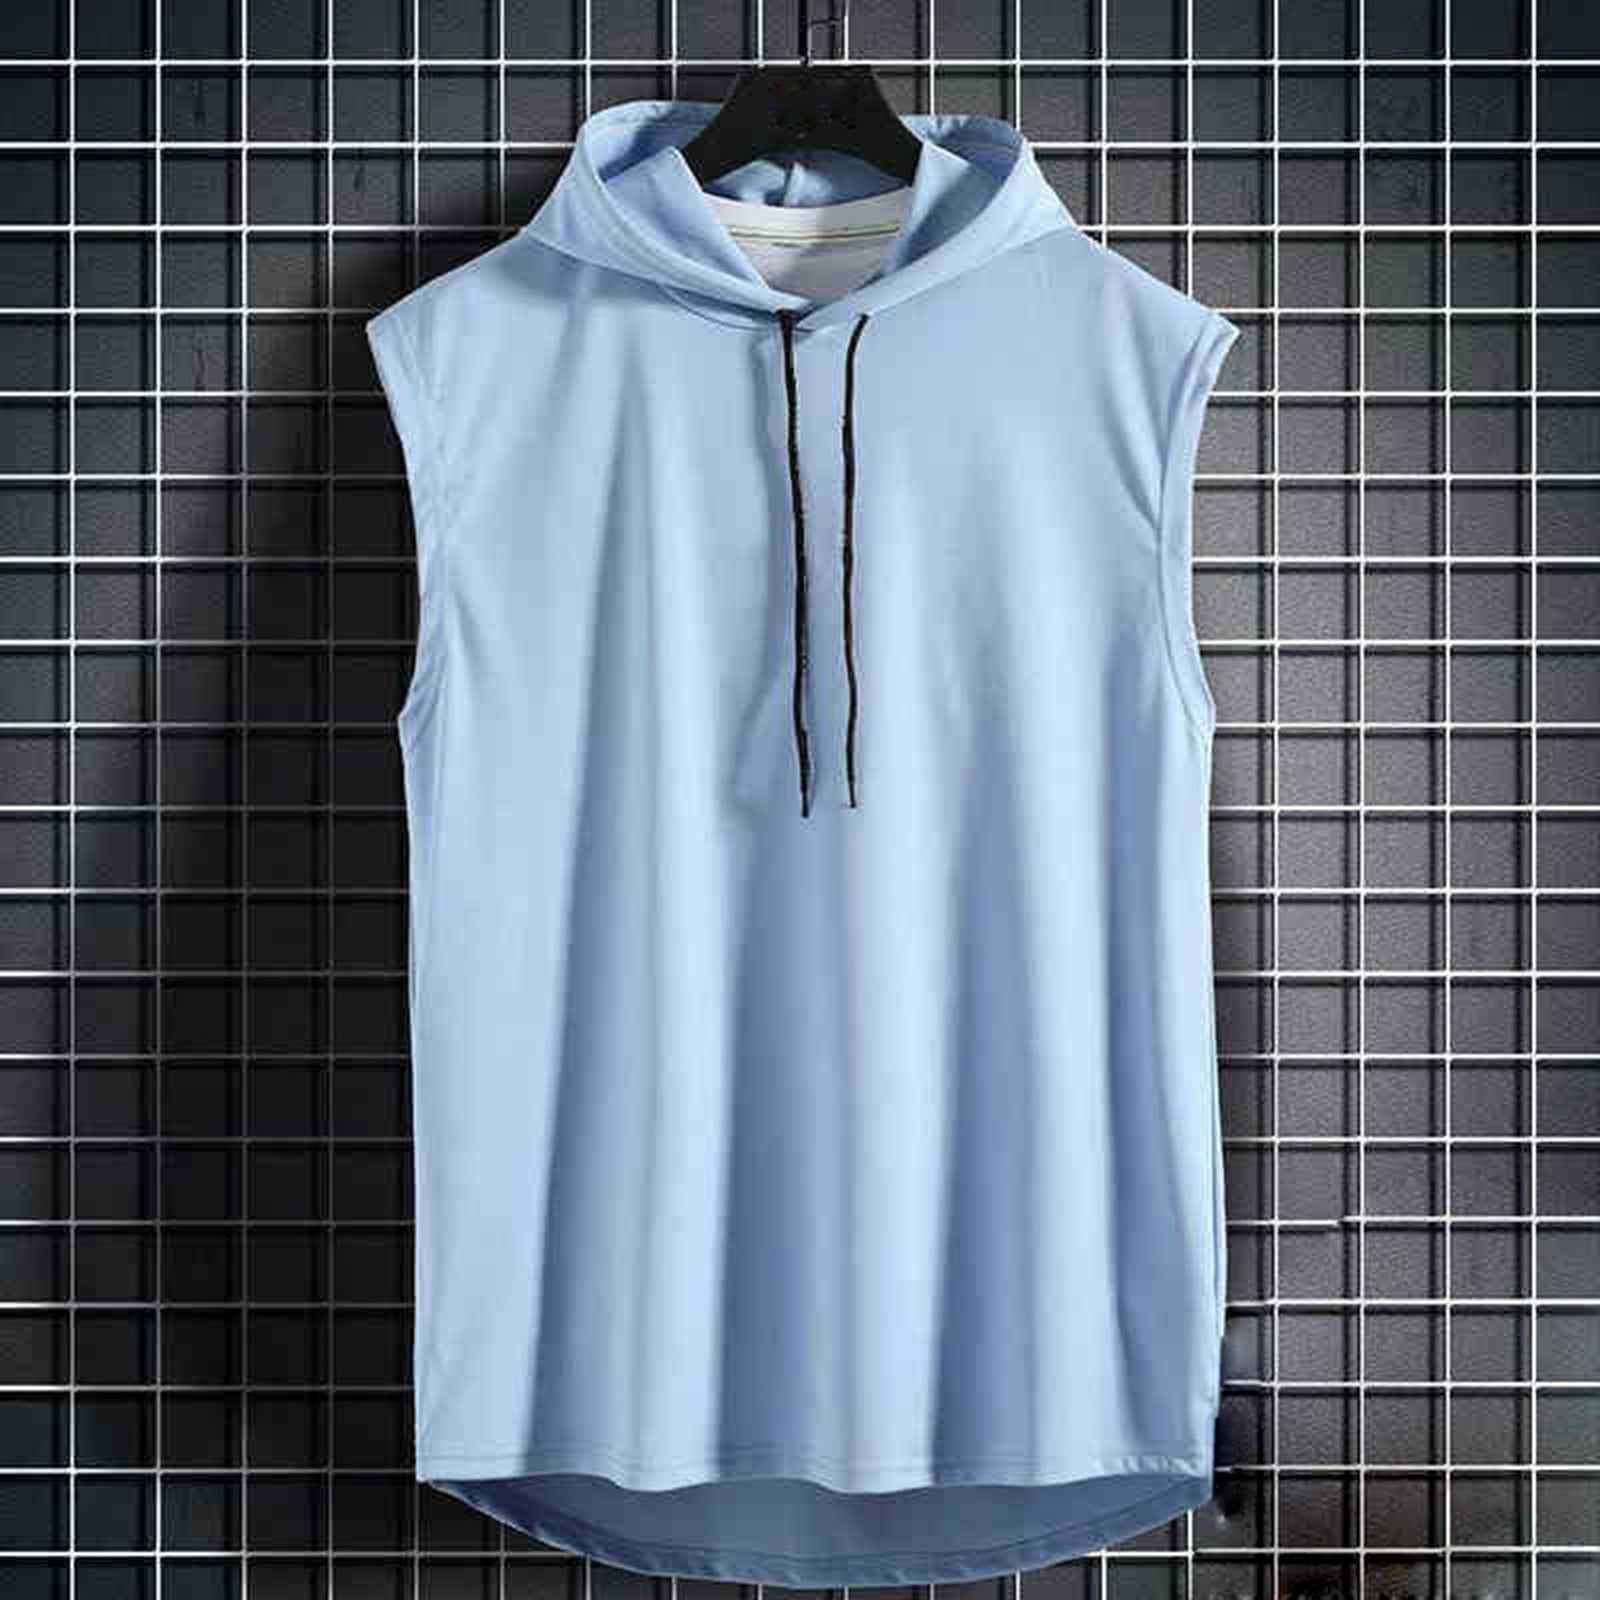 WUWUQF Hoodies Mens Sleeveless Vest Top Casual T-Shirt Solid Color ...